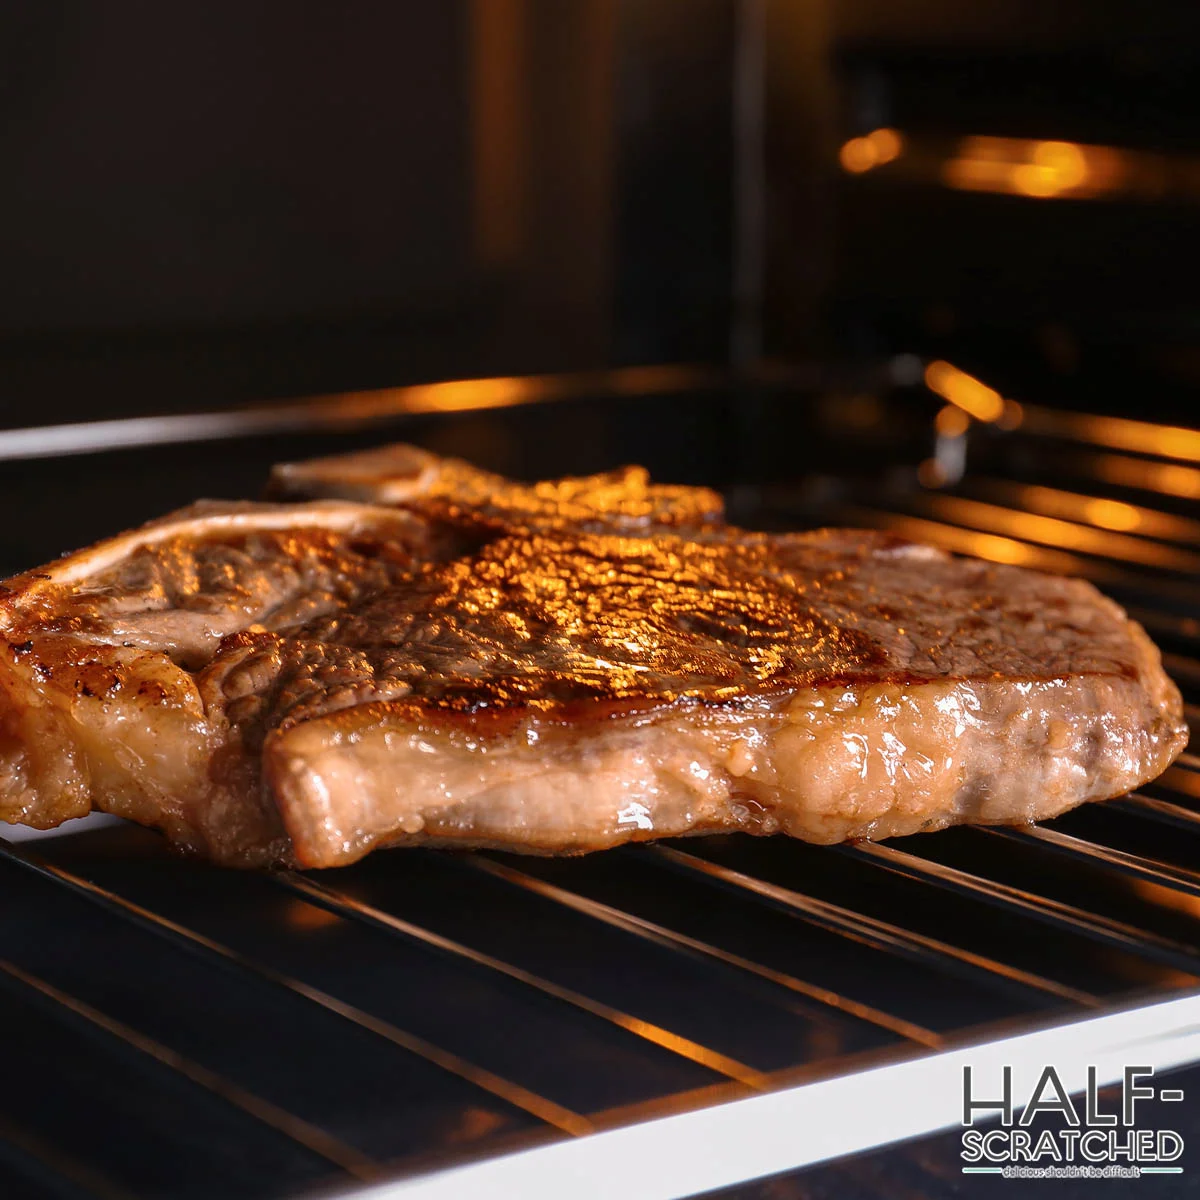 Steak being broiled in the oven